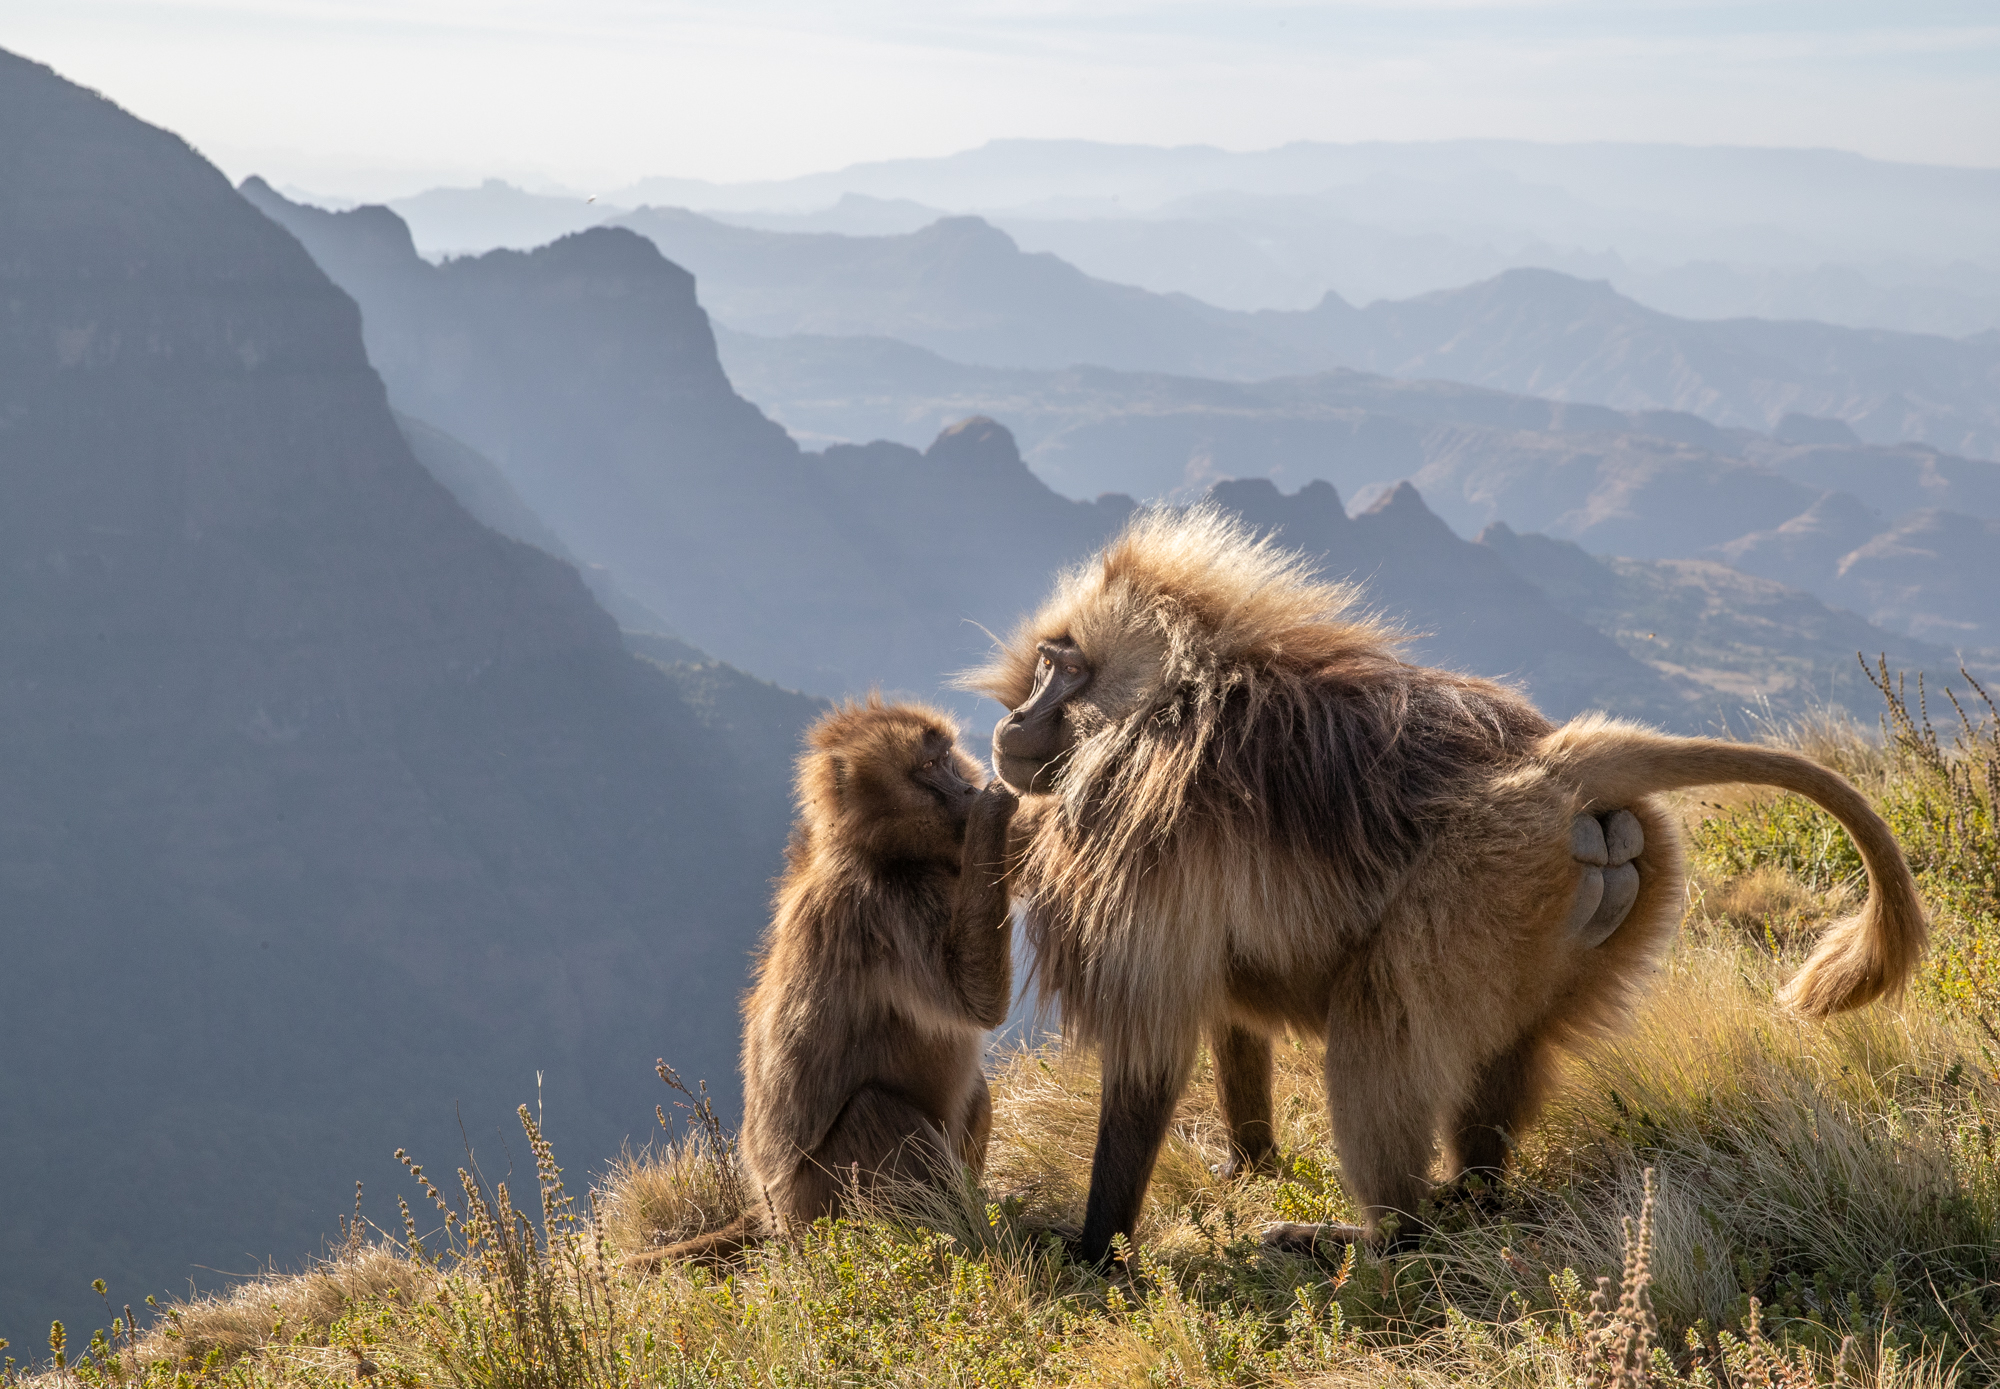   Gelada Monkeys, Simien Mountains, Ethiopia  - A female Gelada Monkey grooms a male at the cliff’s edge.  The only grass eating monkey in the world, and only found in Ethiopia, the Geladas spend their days foraging for food in the highlands.  In the